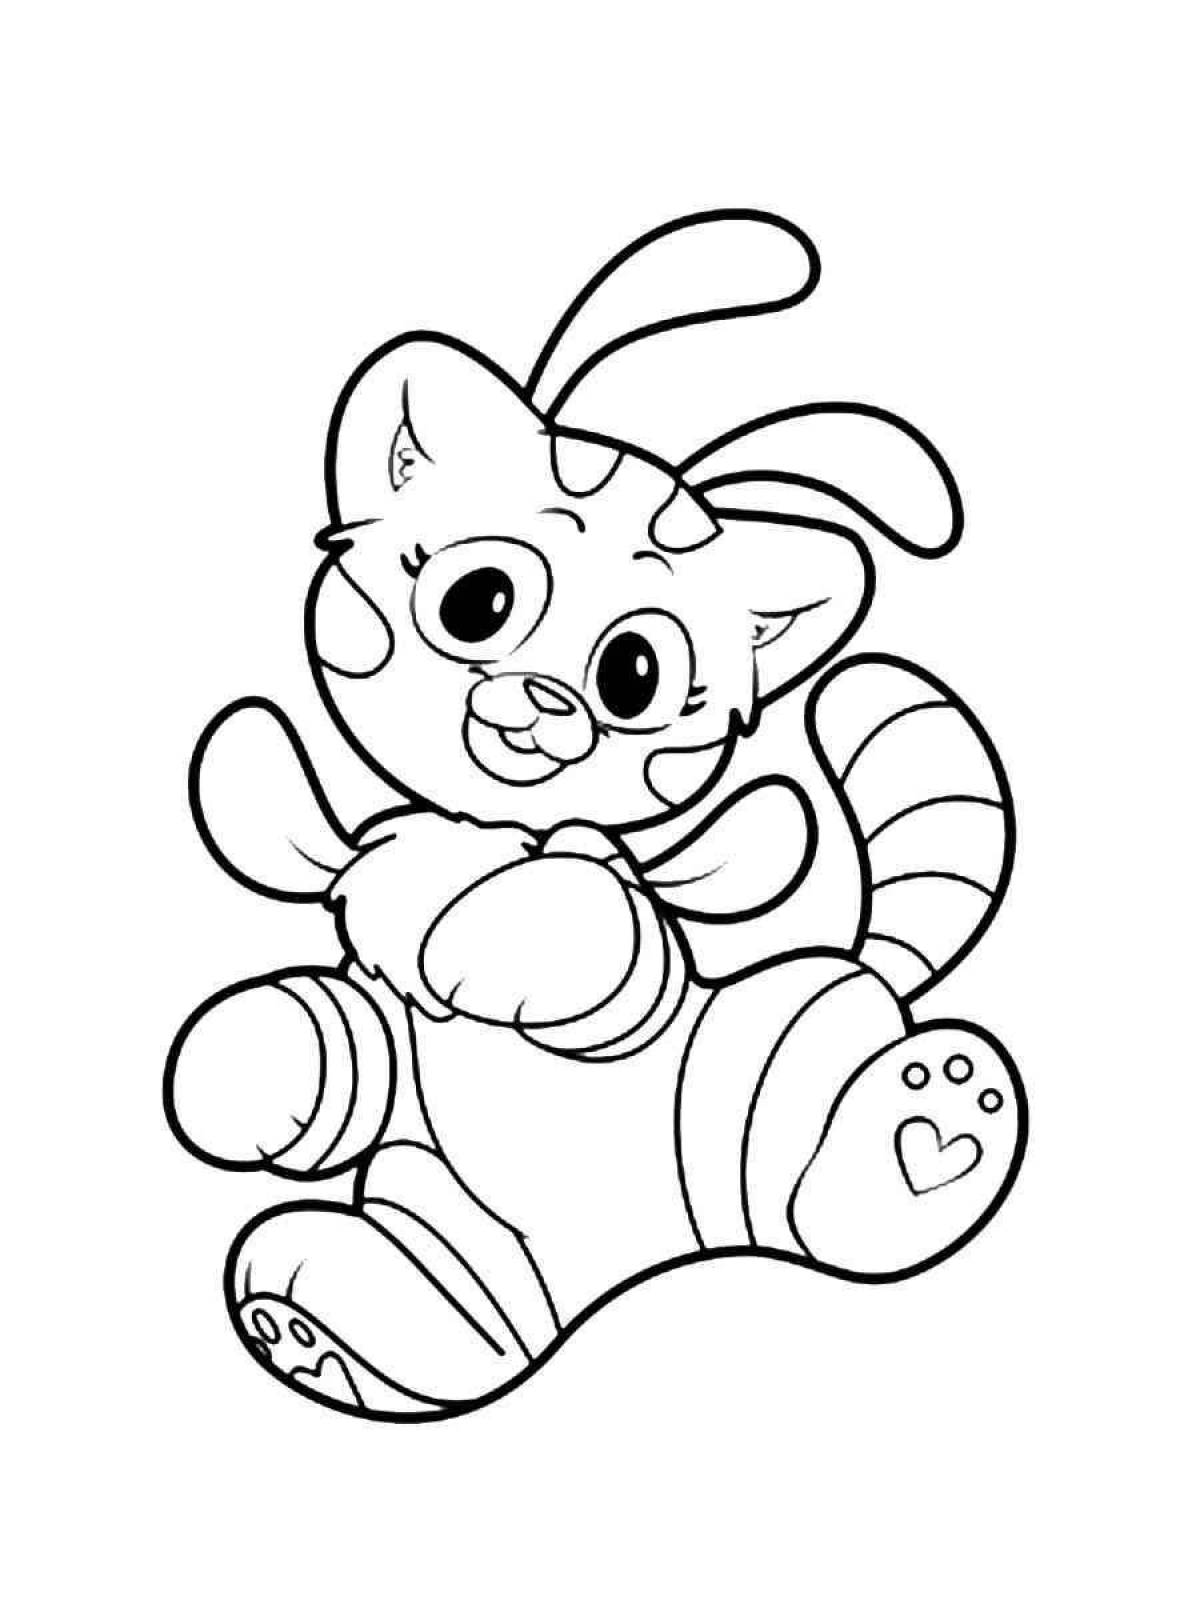 Coloring book shiny cat and bee